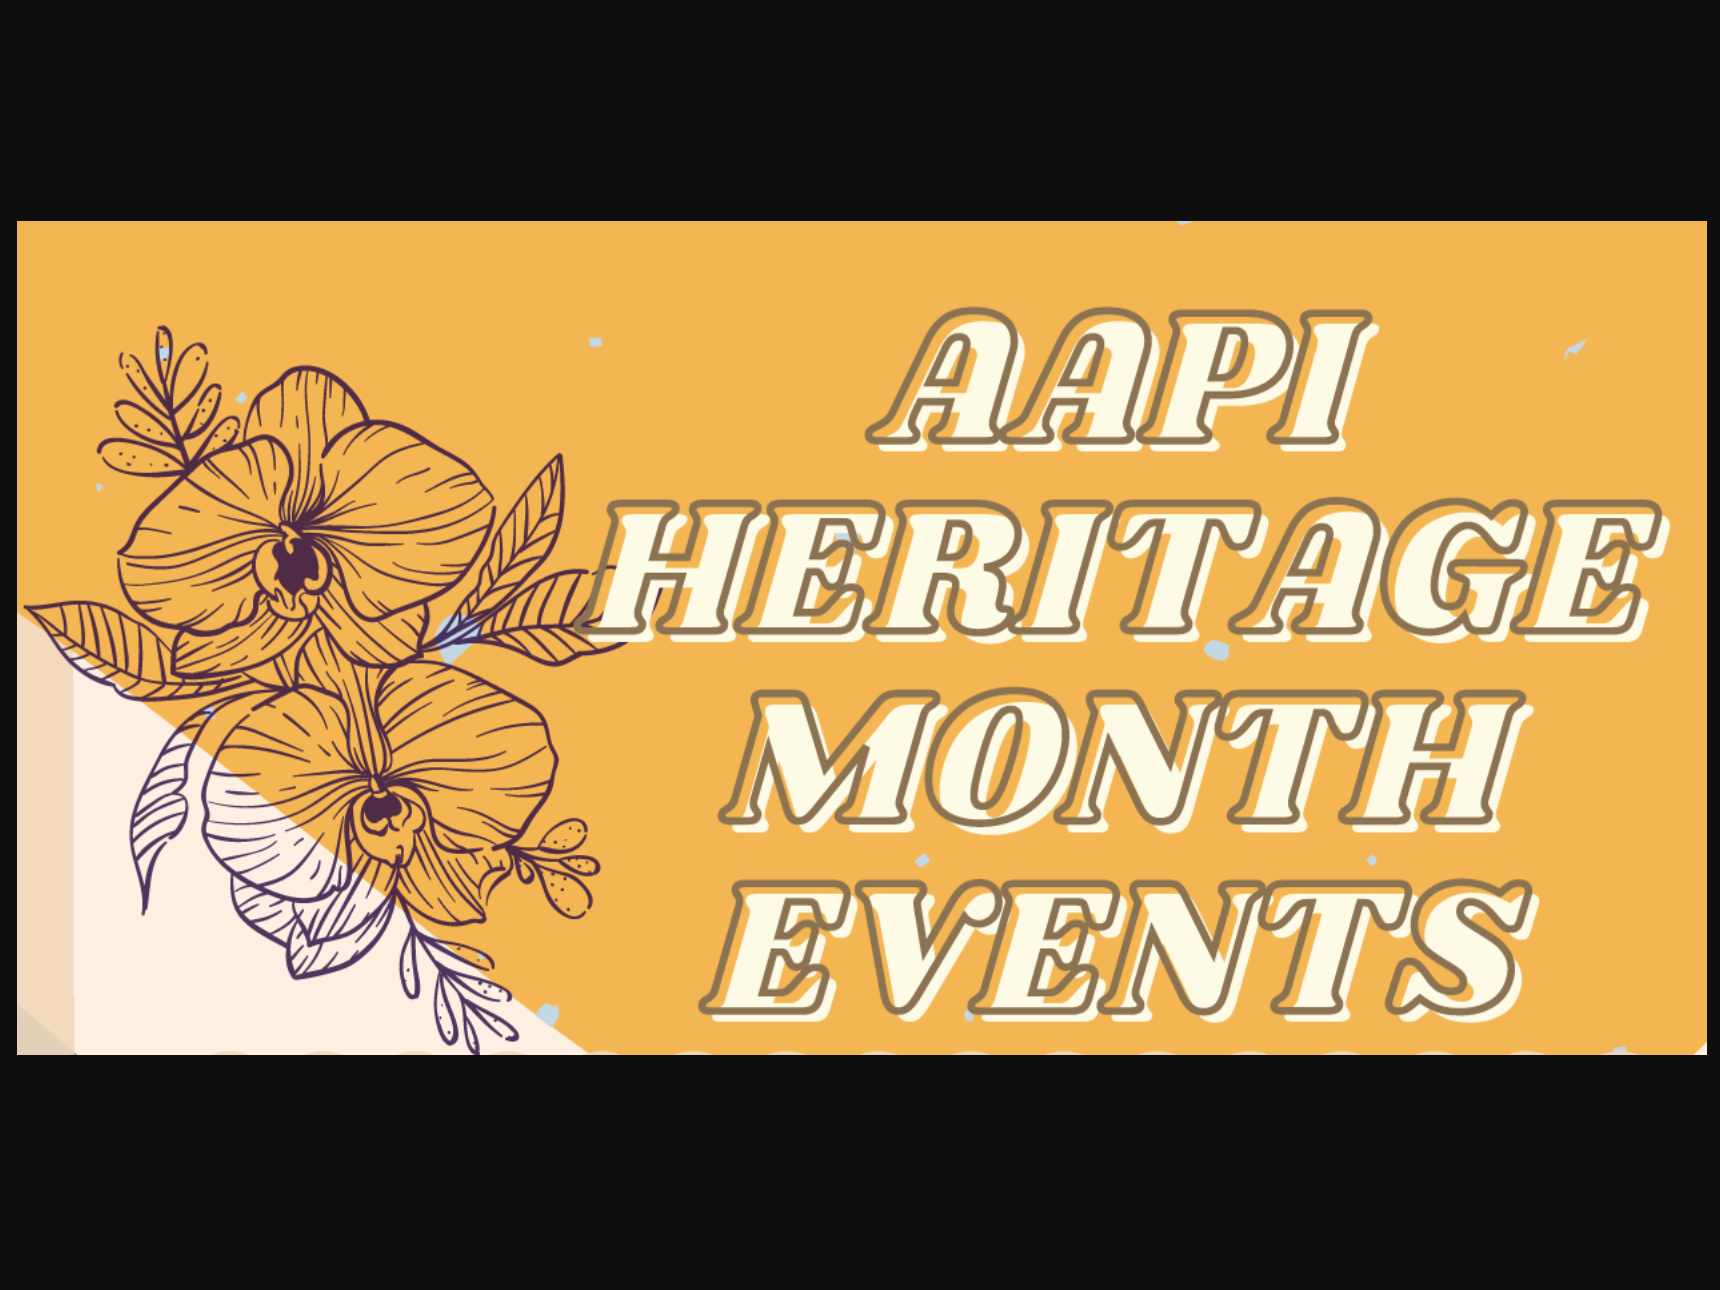 Elon to celebrate AAPI Heritage Month with events throughout April